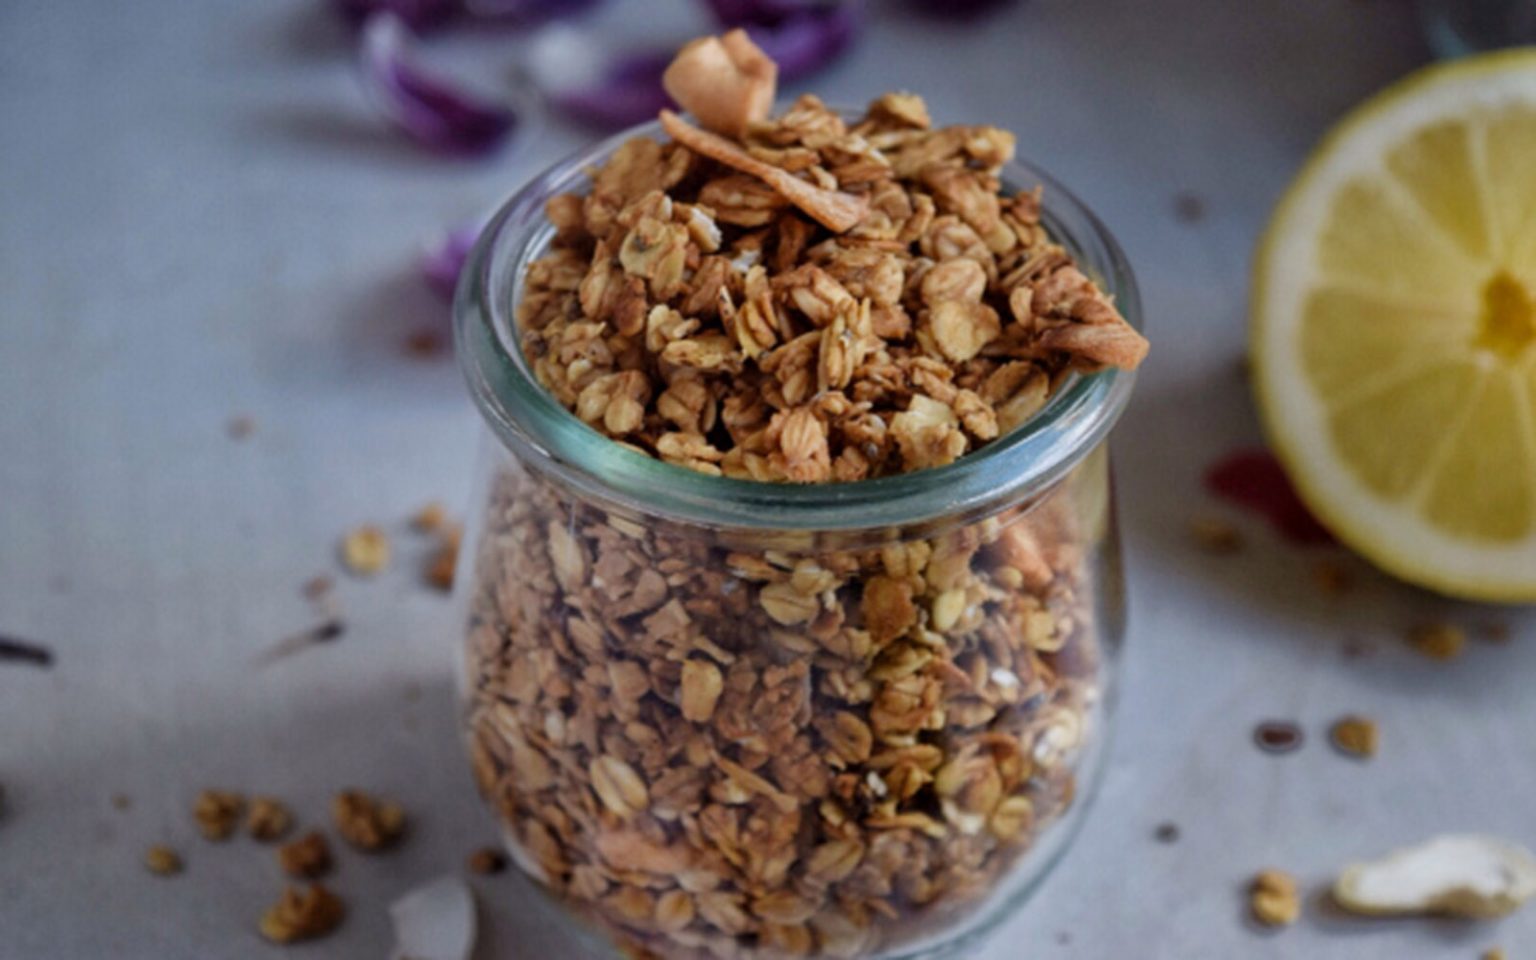 15 Easy, Healthy, Plant-Based Granola Recipes! - One Green Planet